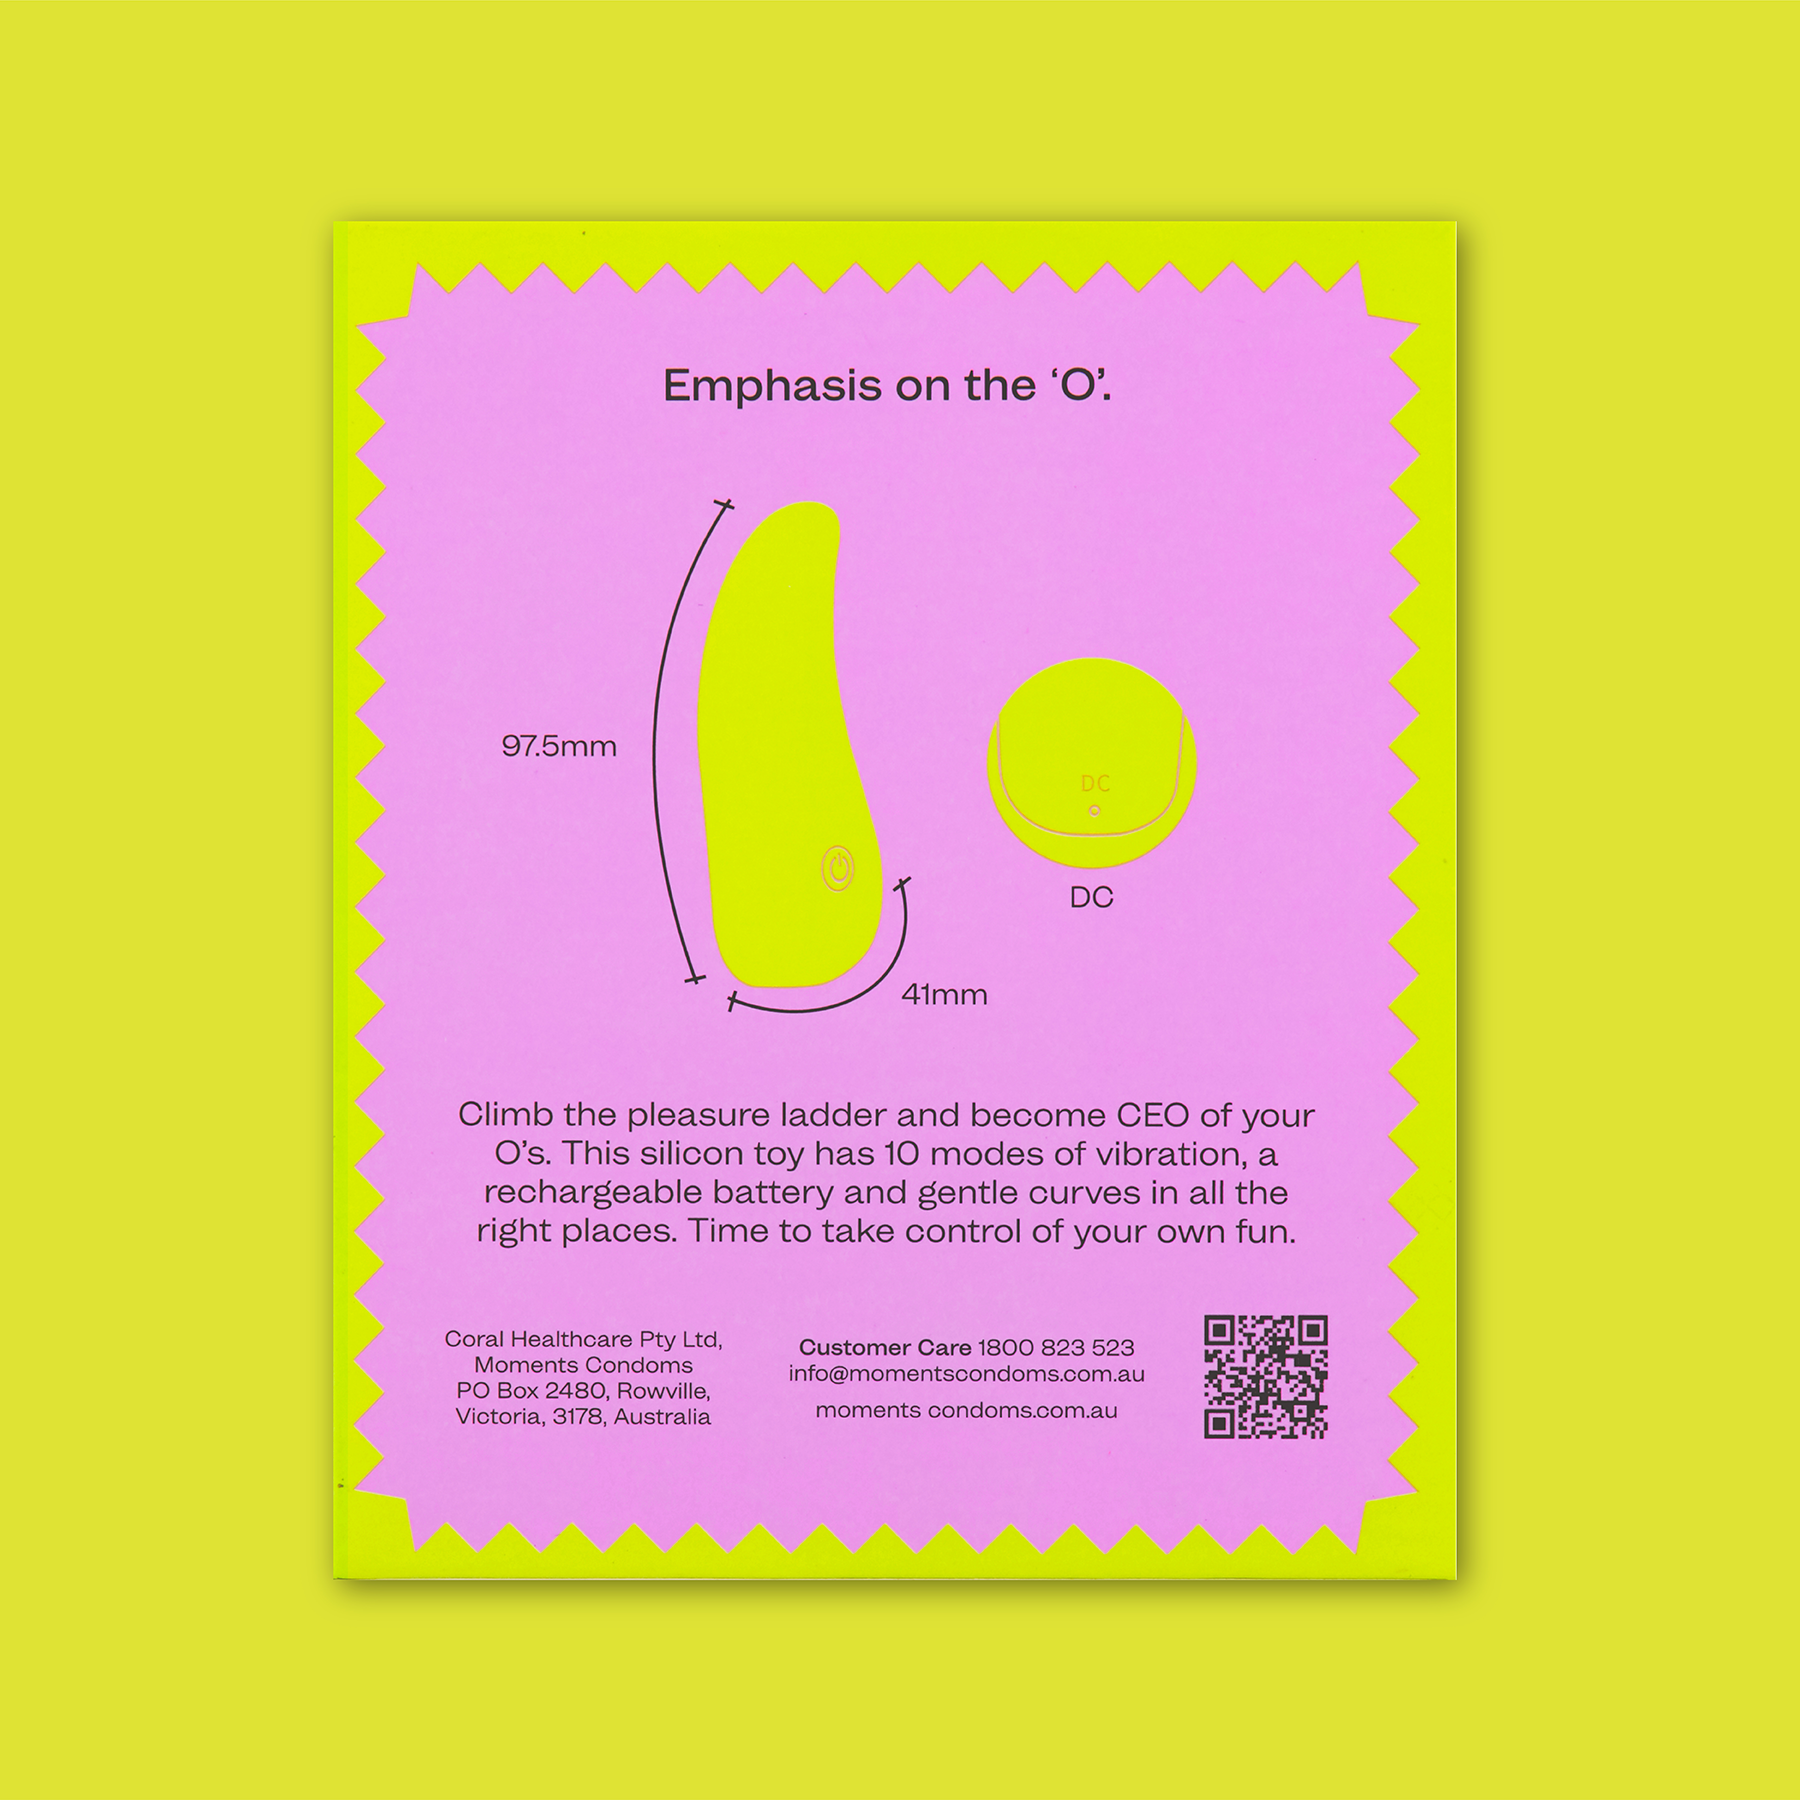 Promotional poster for the CEO sex toy with yellow and pink design